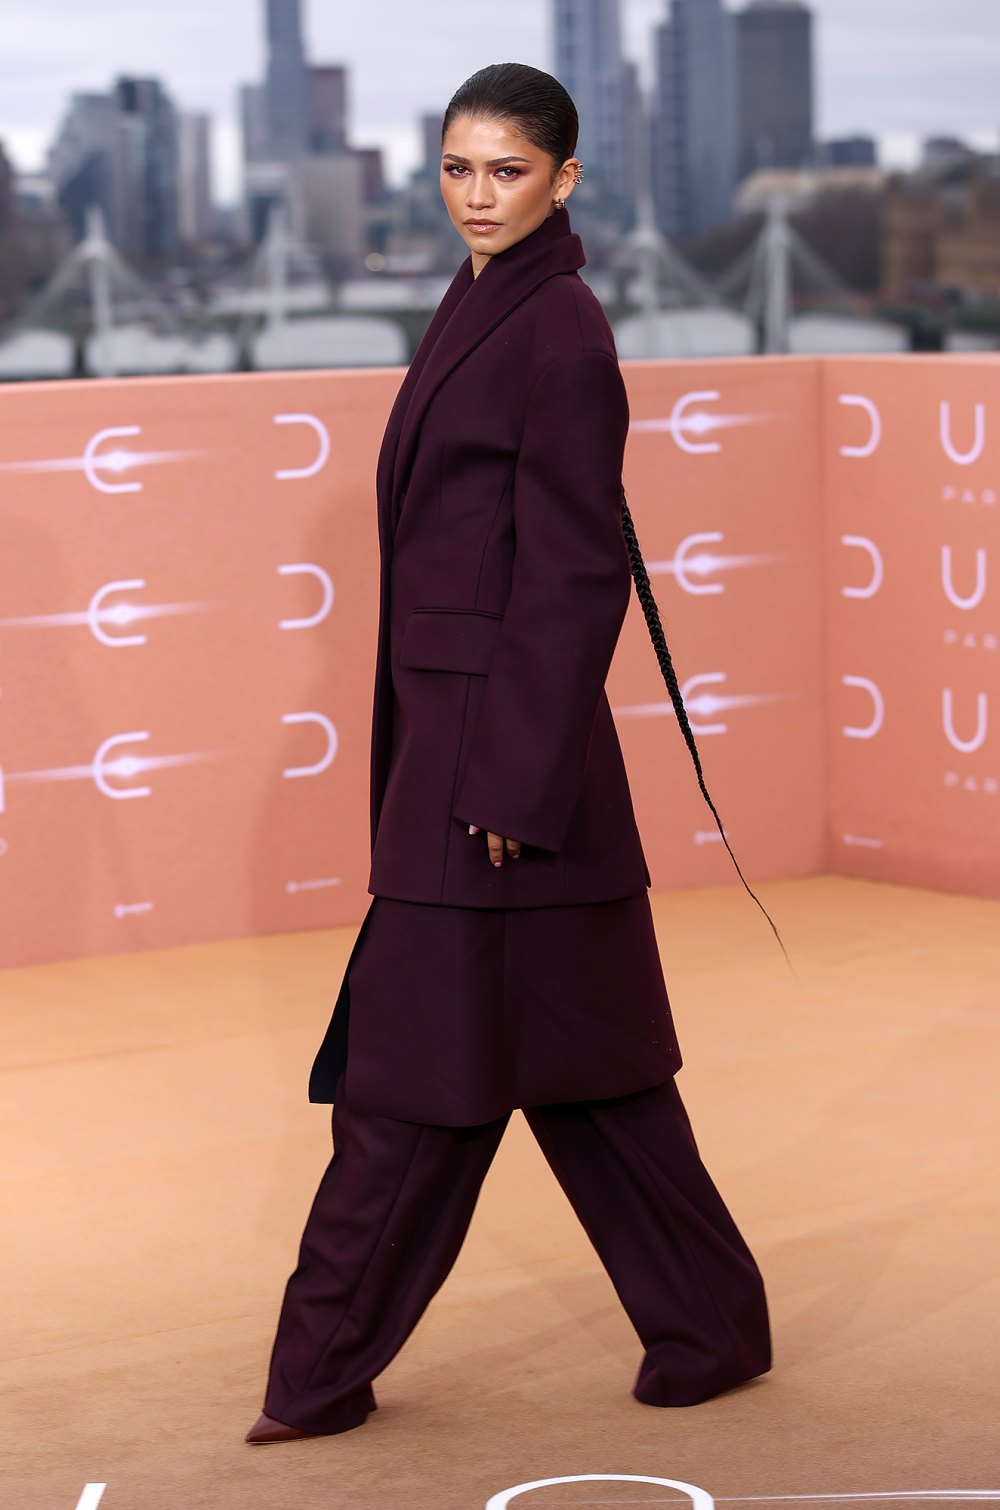 Timothee Chalamet and Zendaya Coordinate in Maroon Looks While Promoting Dune Part Two